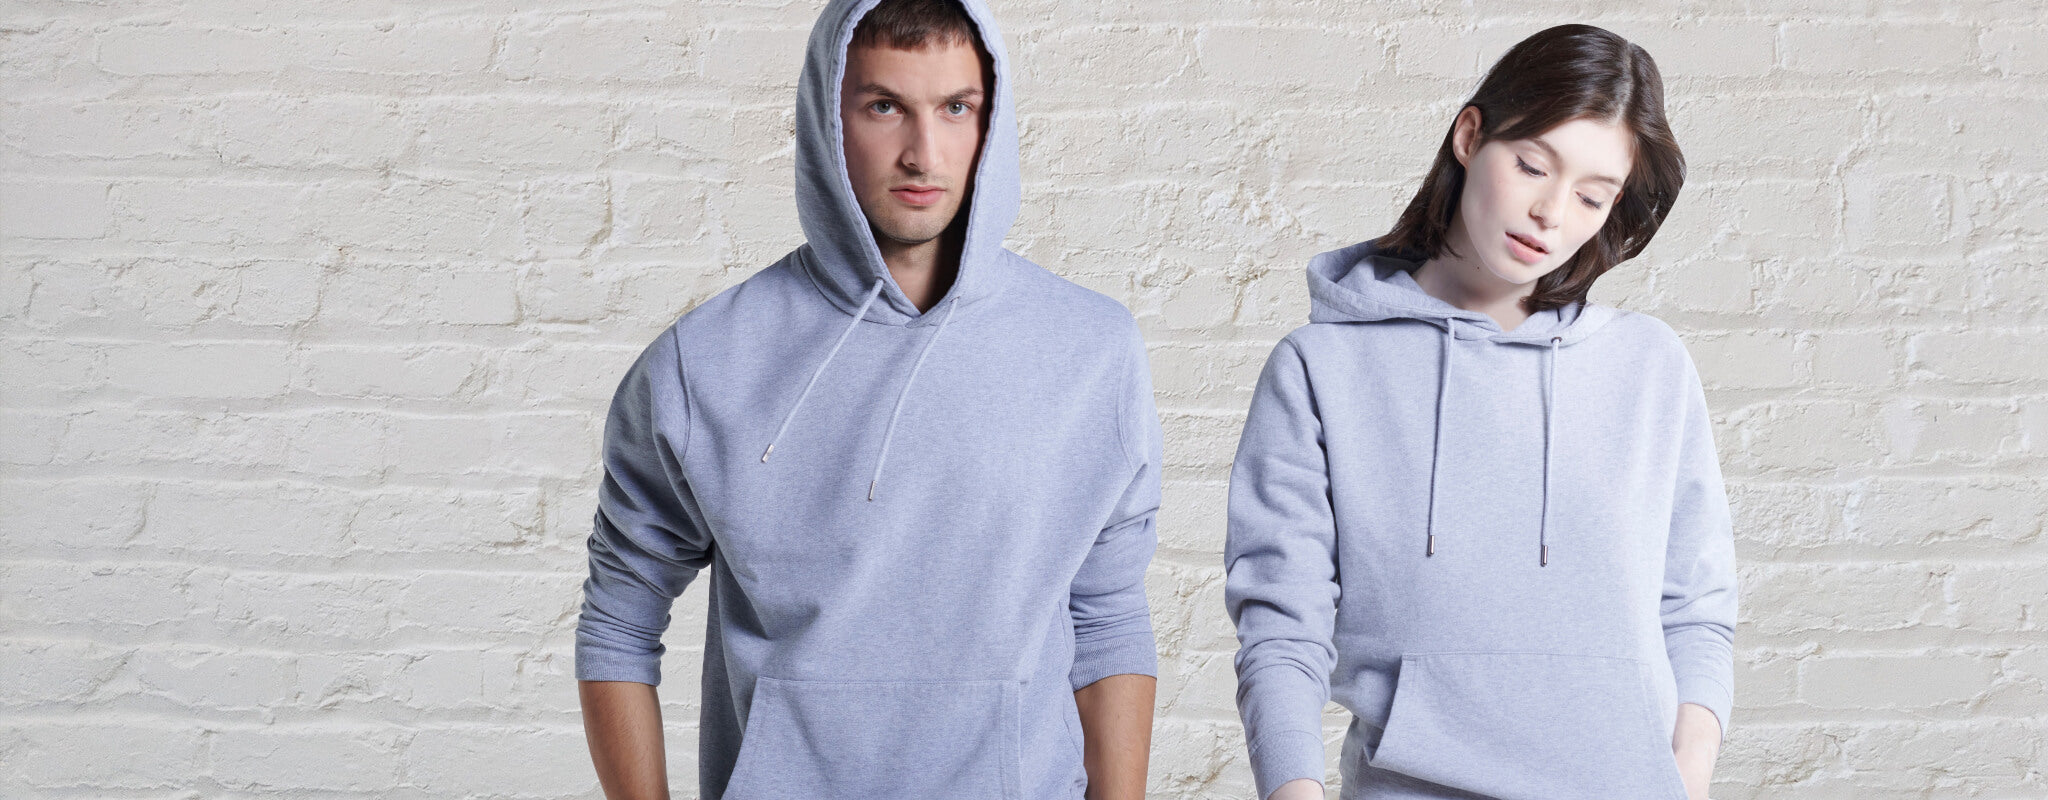 How to style a grey hoodie? 5 outfit ideas for men & women